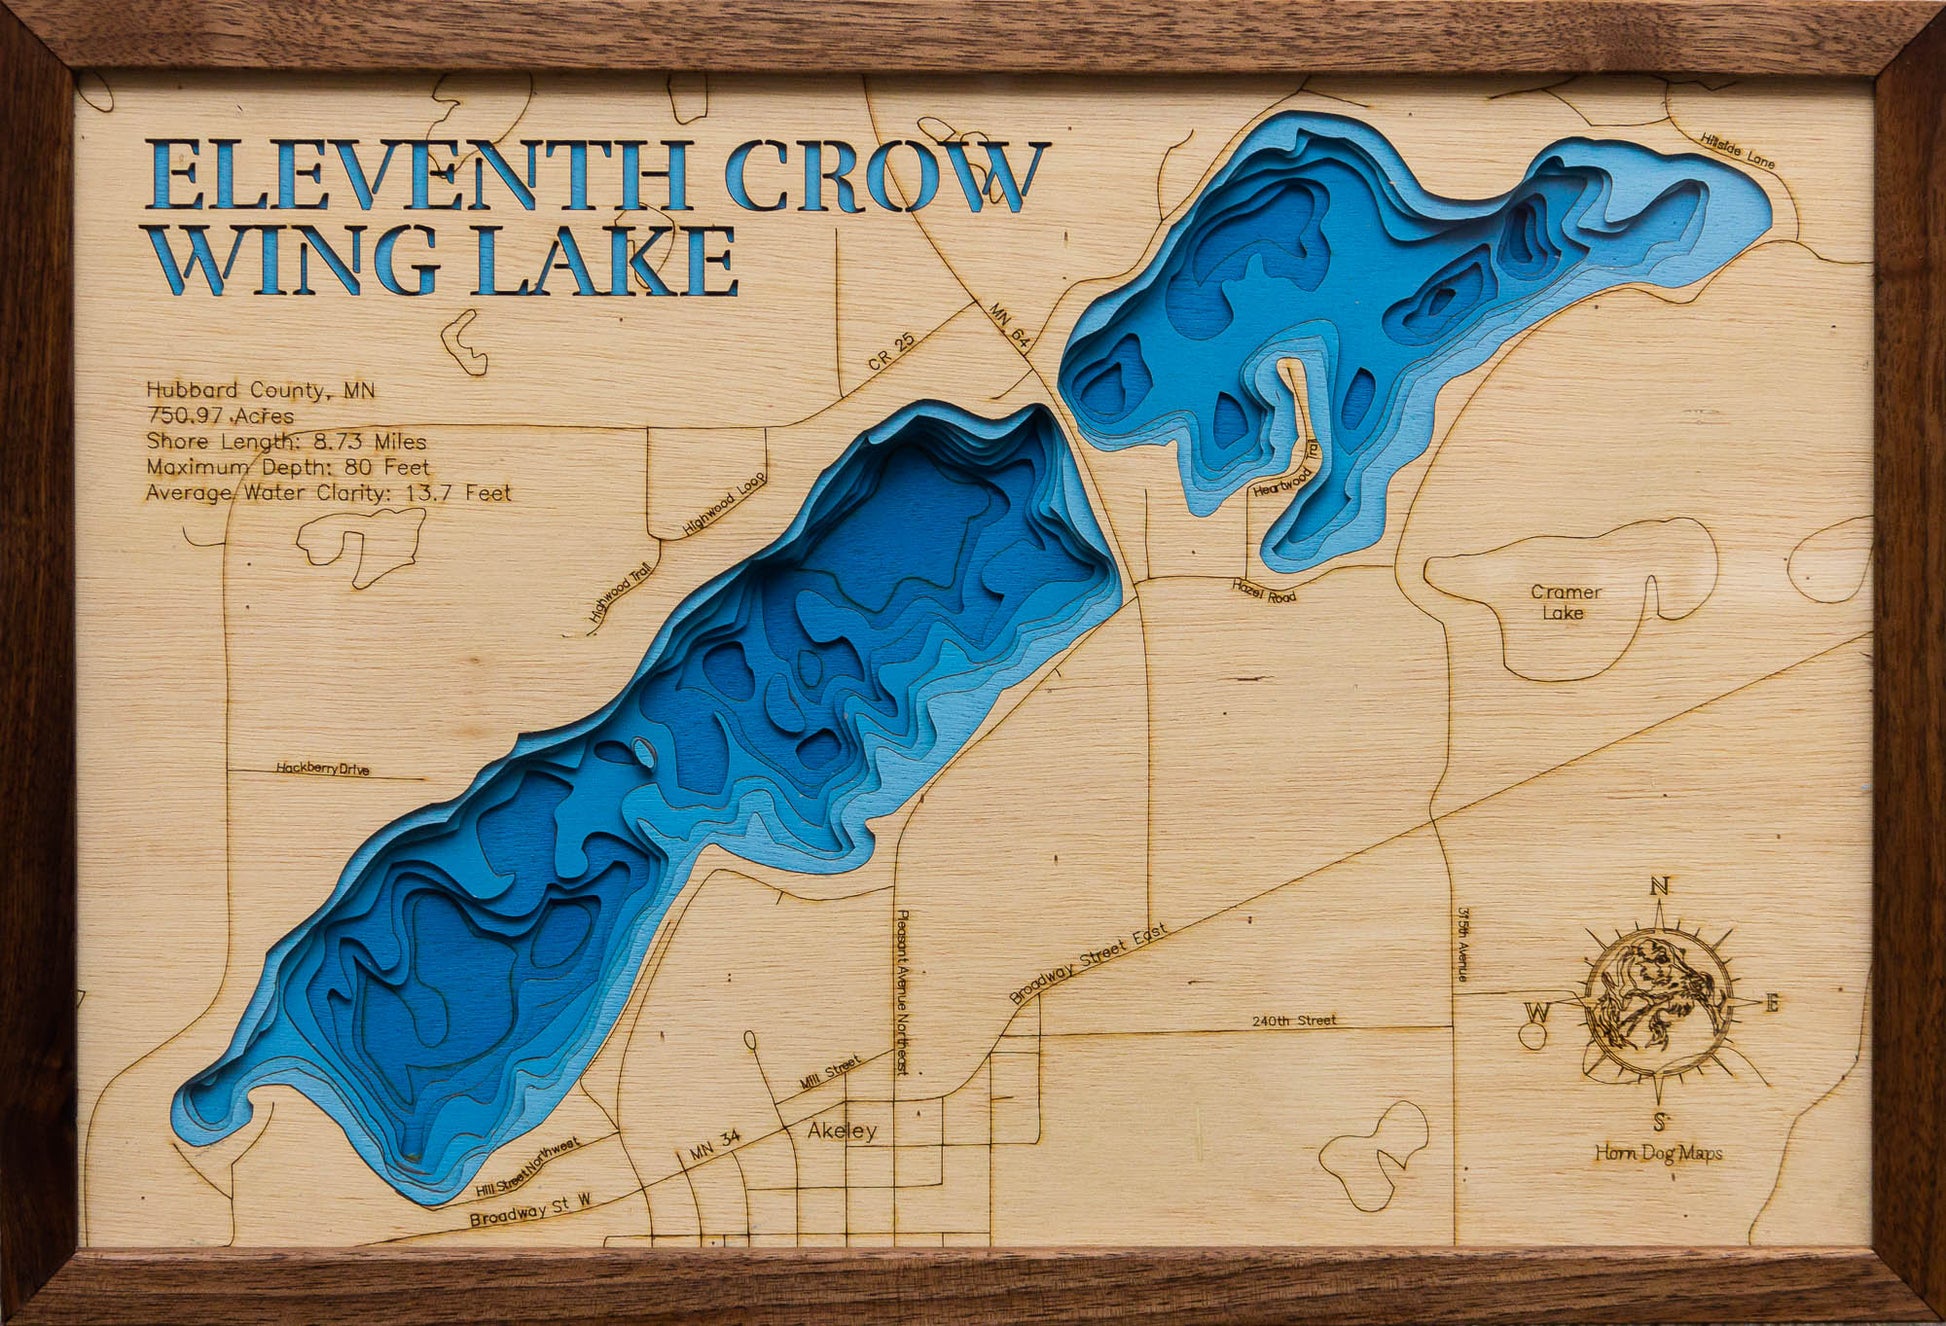 Eleventh Crow Wing Lake in Hubbard County, MN